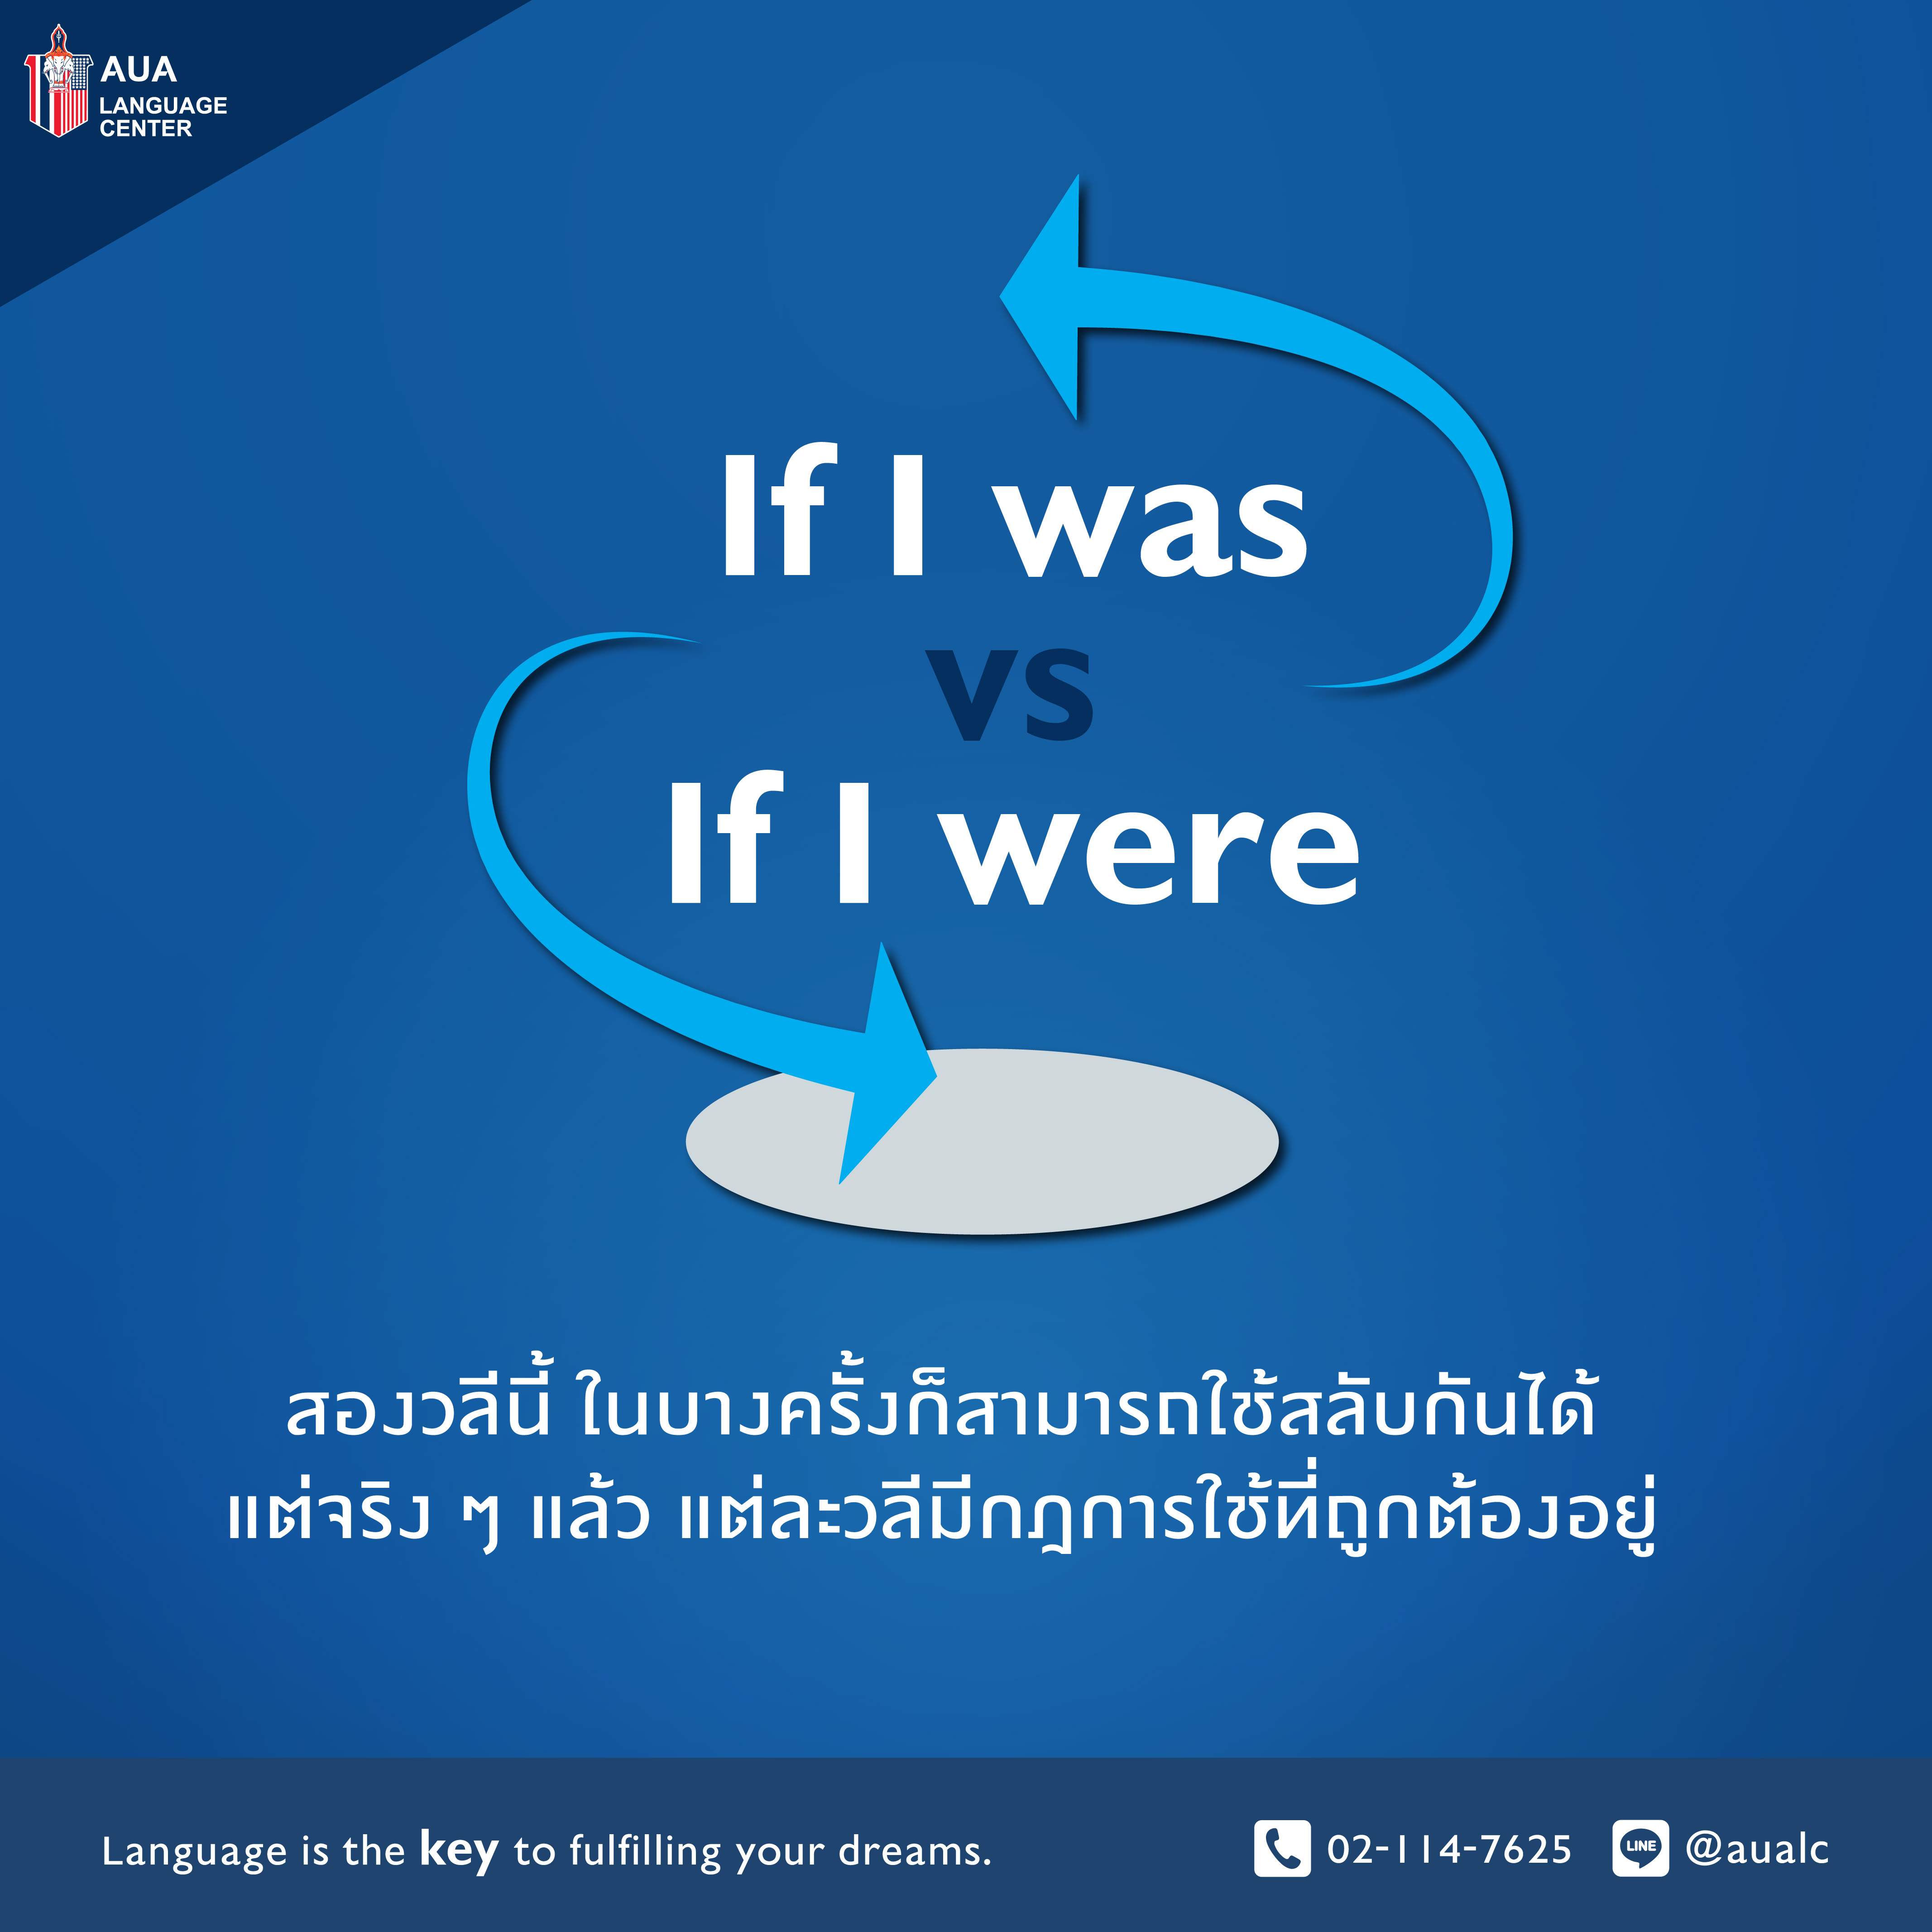 ‘If I was’ VS ‘If I were’